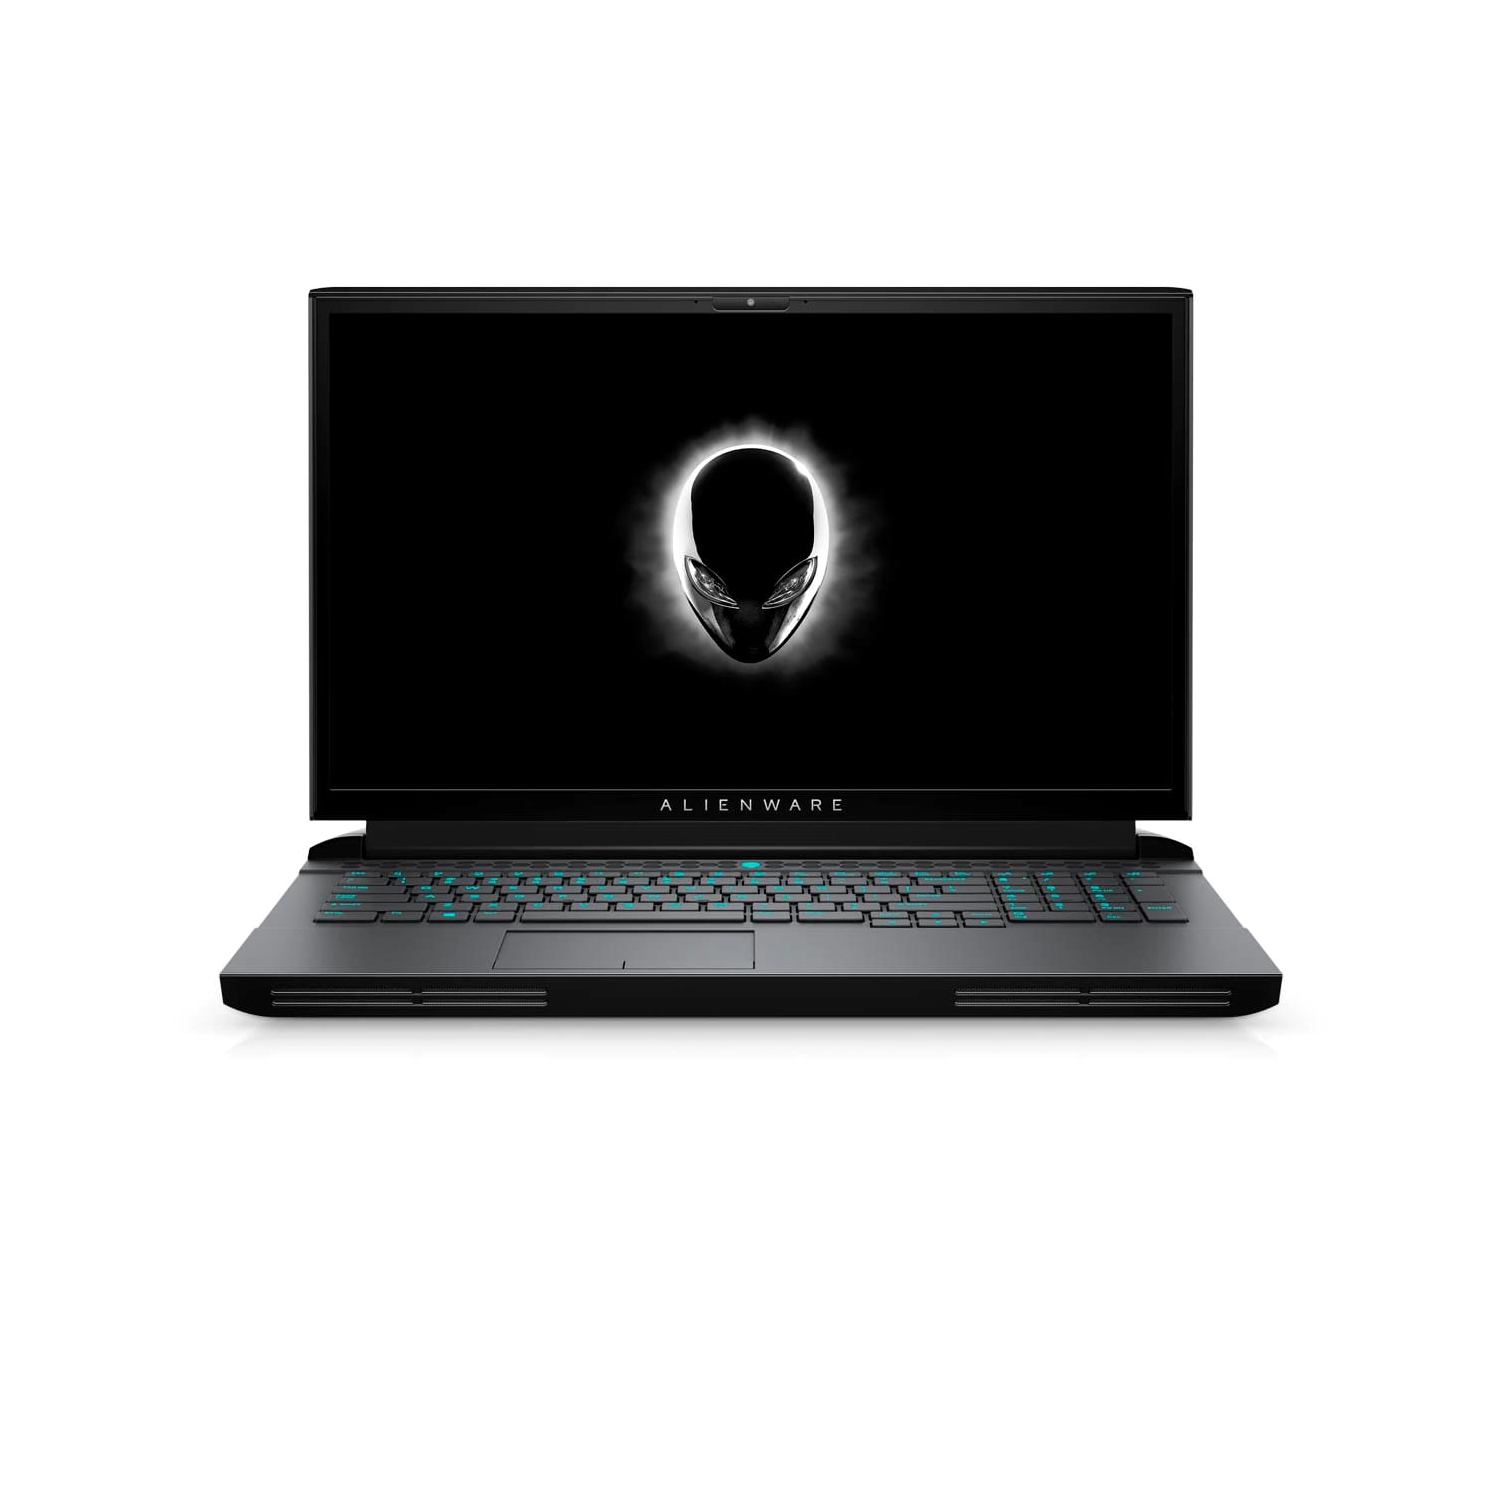 Refurbished (Excellent) - Dell Alienware 17 51m R2 Gaming Laptop (2020), 17.3" FHD, Core i7, 1TB SSD, 16GB RAM, 2070 Super, 8 Cores @ 4.8 GHz, 10th Gen CPU Certified